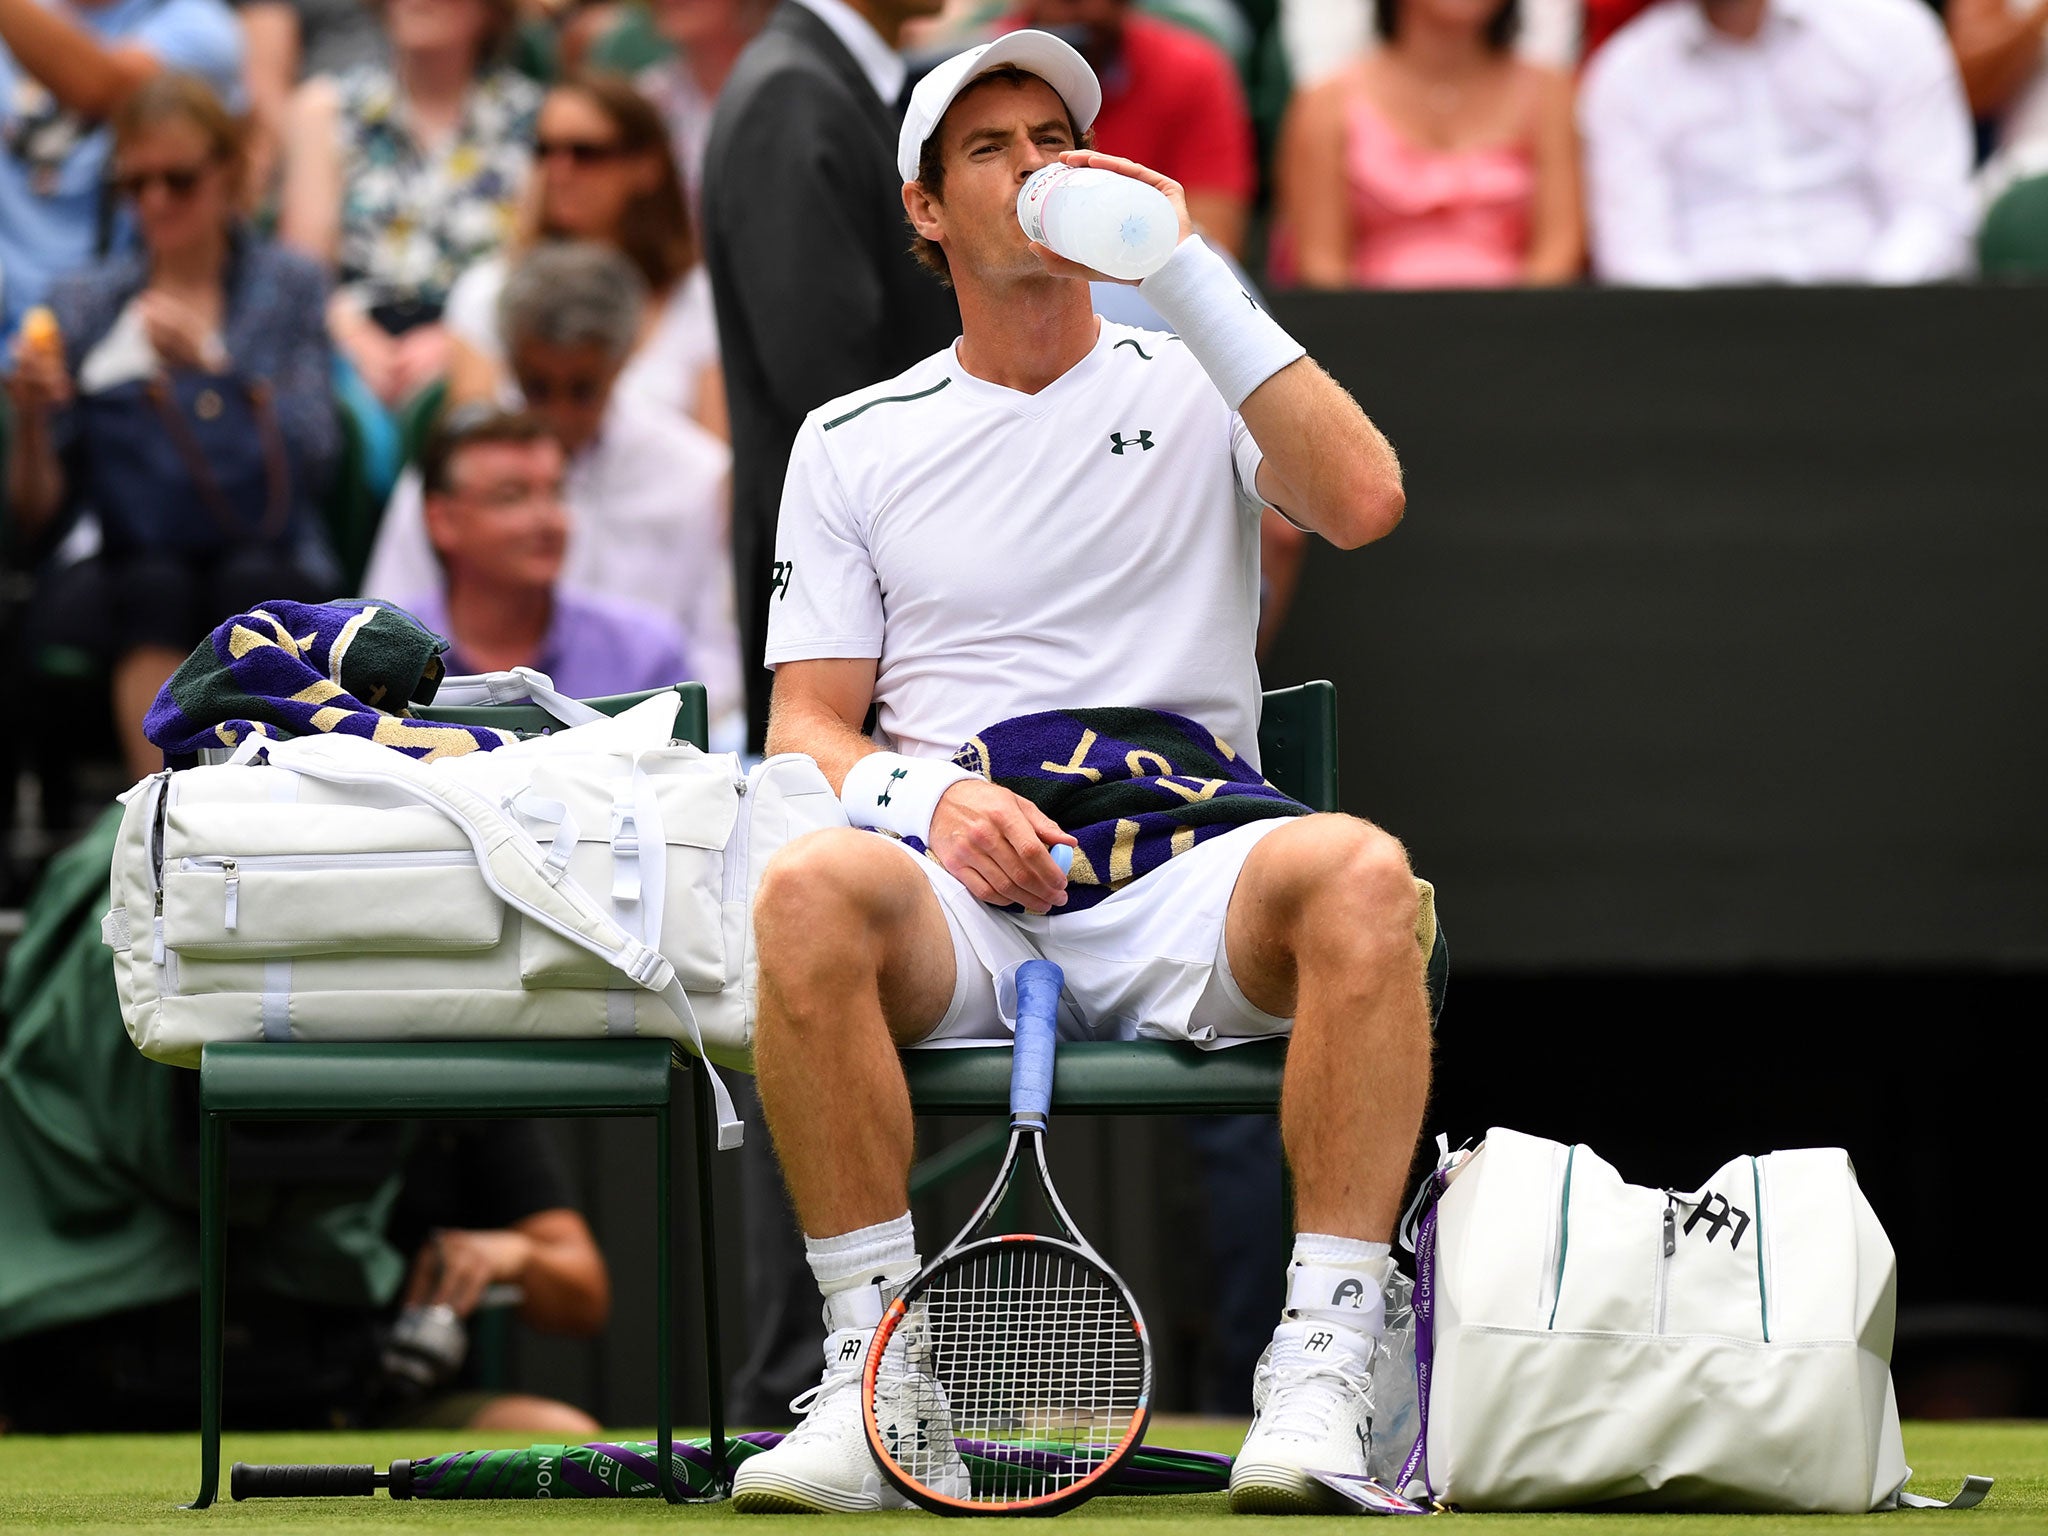 Murray during a water break on Centre Court